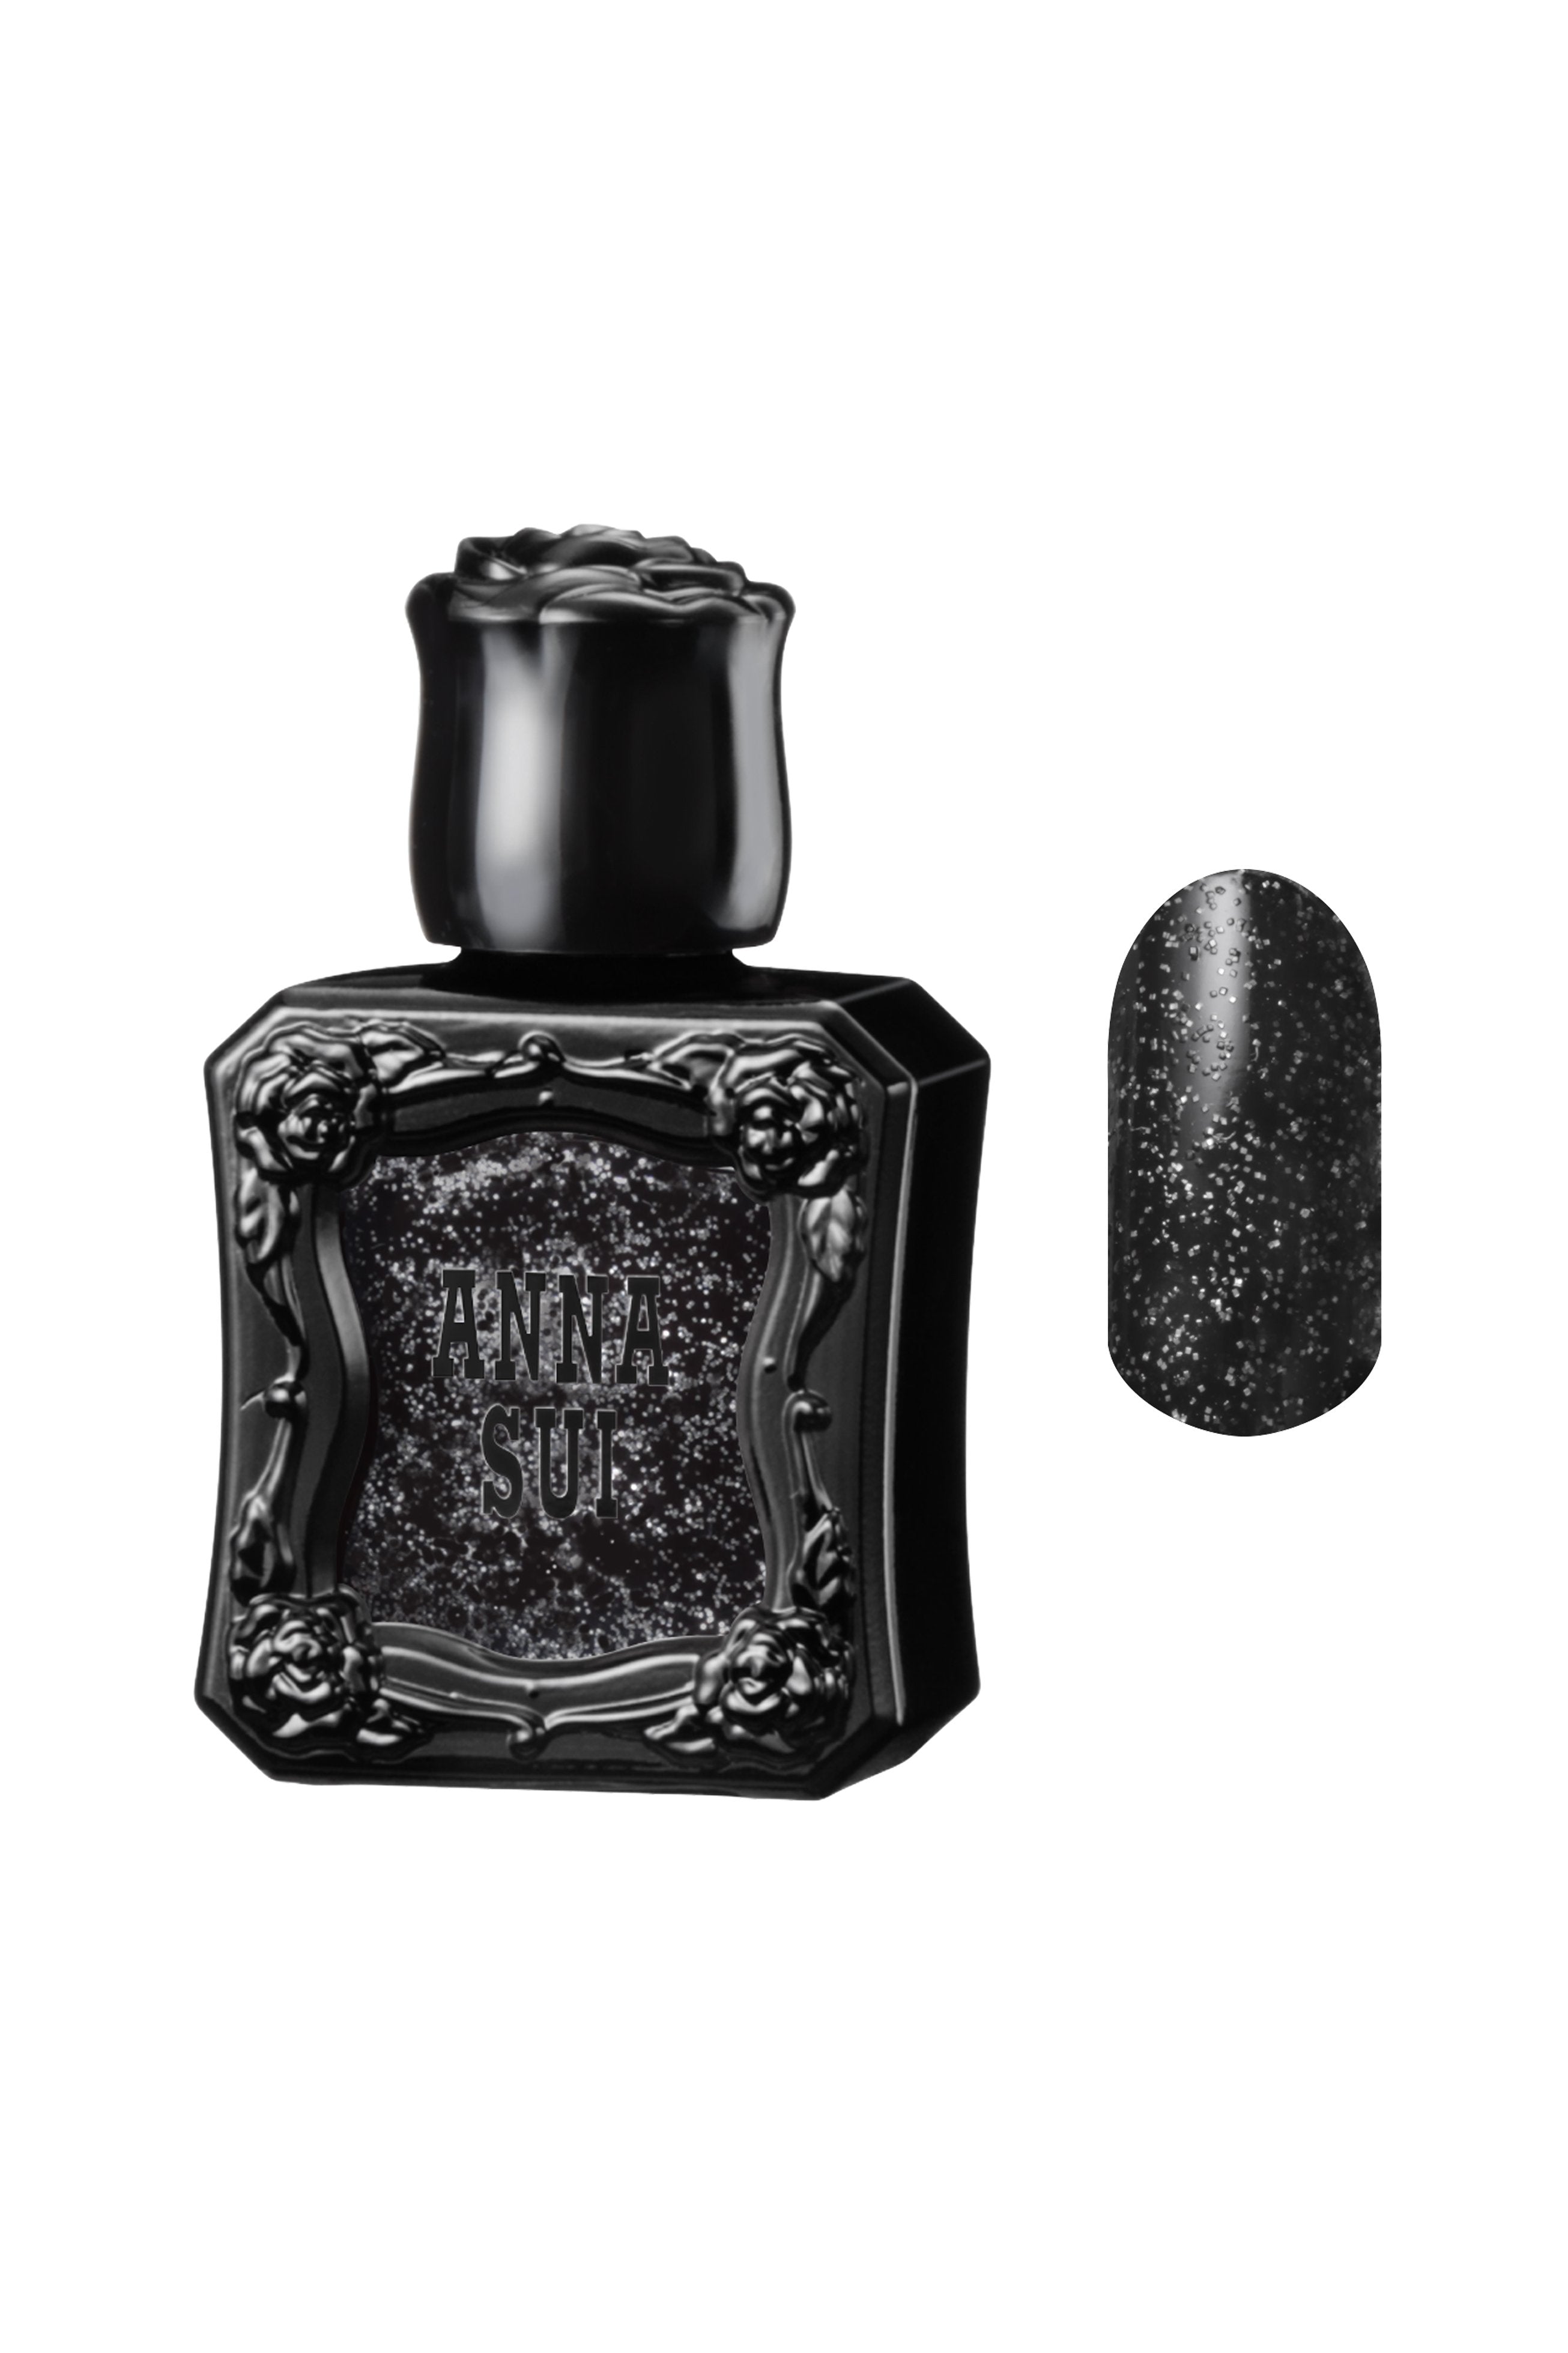 SILVER LAME MONOCHROME Nail Polish bottles, with raised rose pattern, Anna Sui in black over nail colors in bottle front